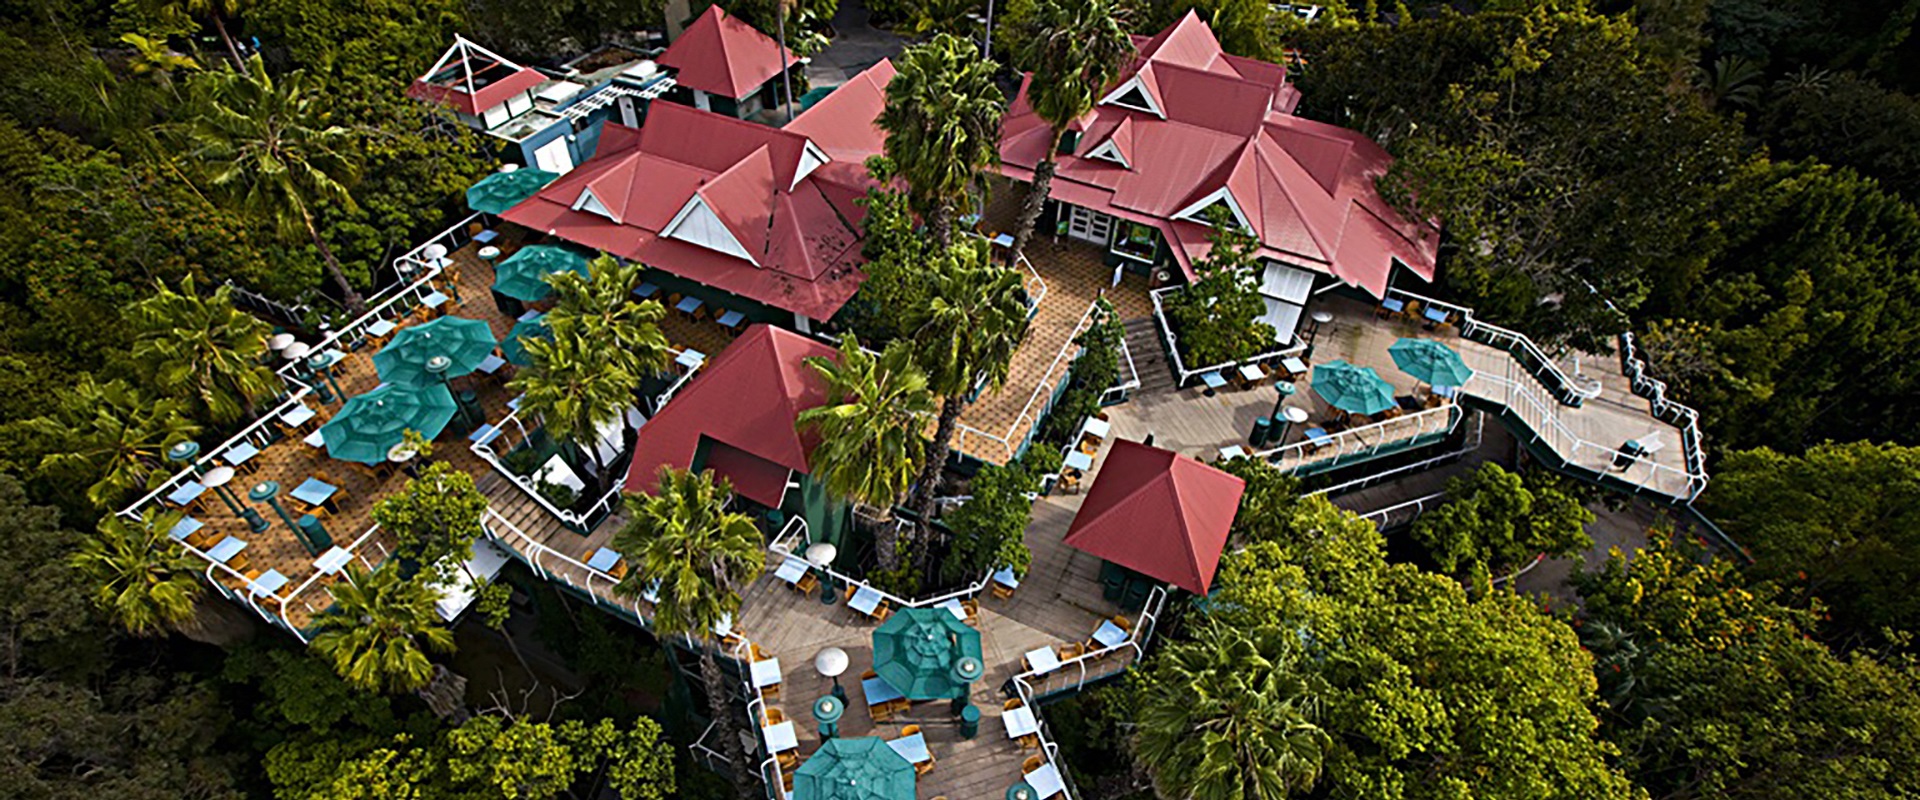 An arial view Albert's Restaurant at the San Diego Zoo. The restaurant has a red roof and is surrounded by a wooden deck with tables and teal colored umbrellas.